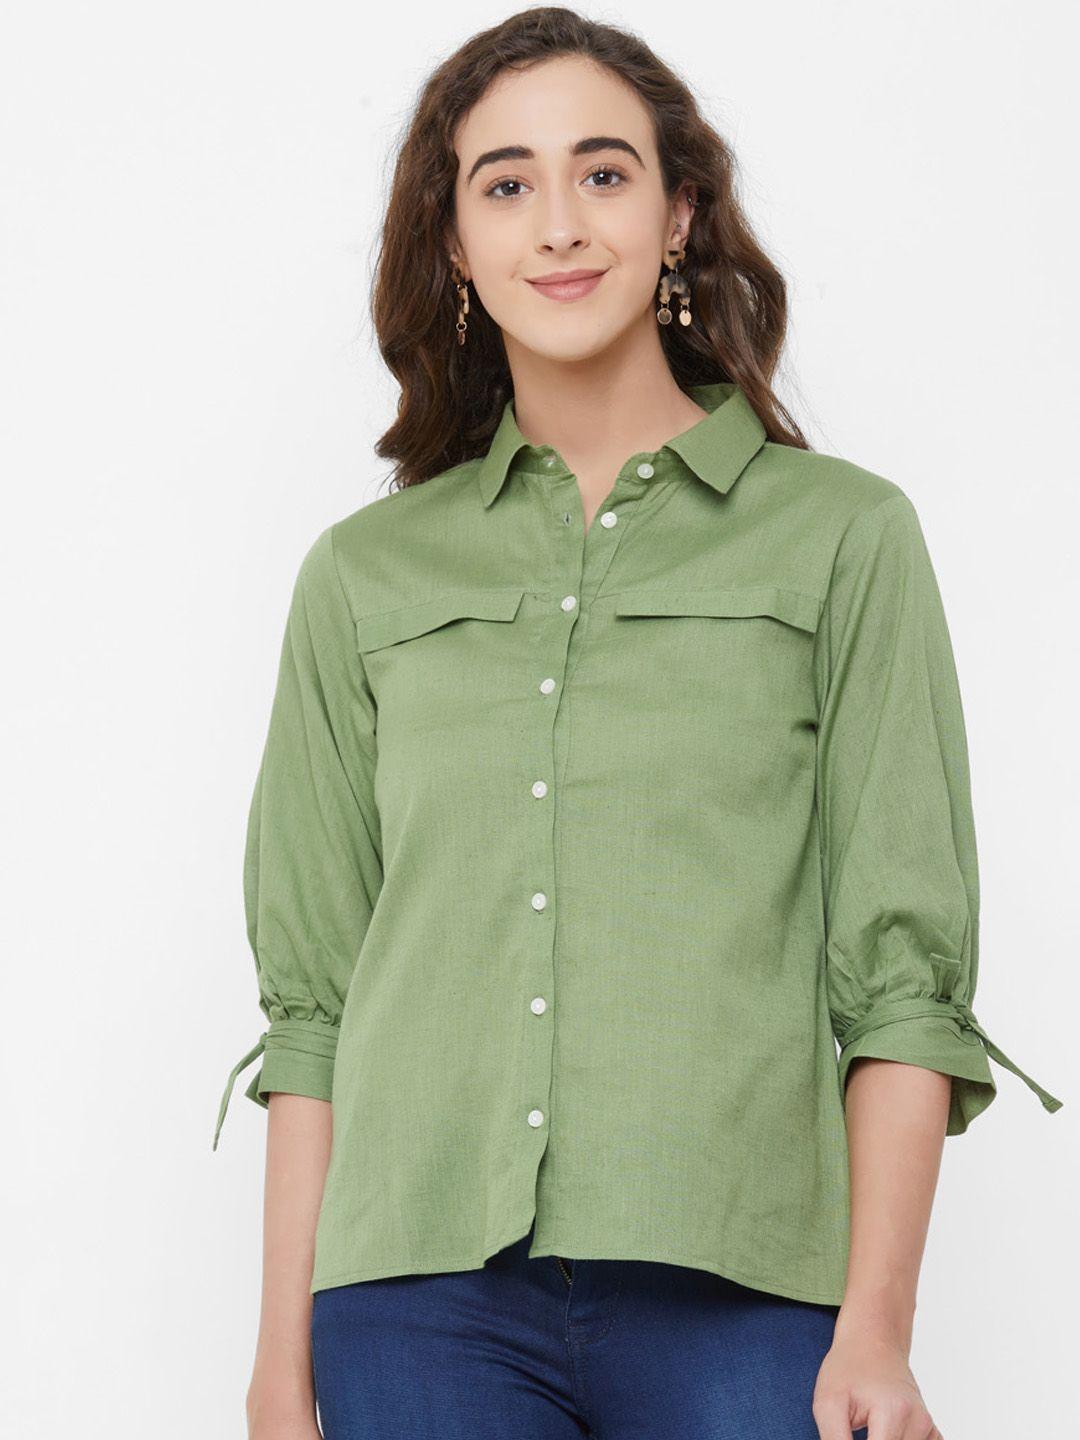 109f women olive green regular fit solid casual shirt